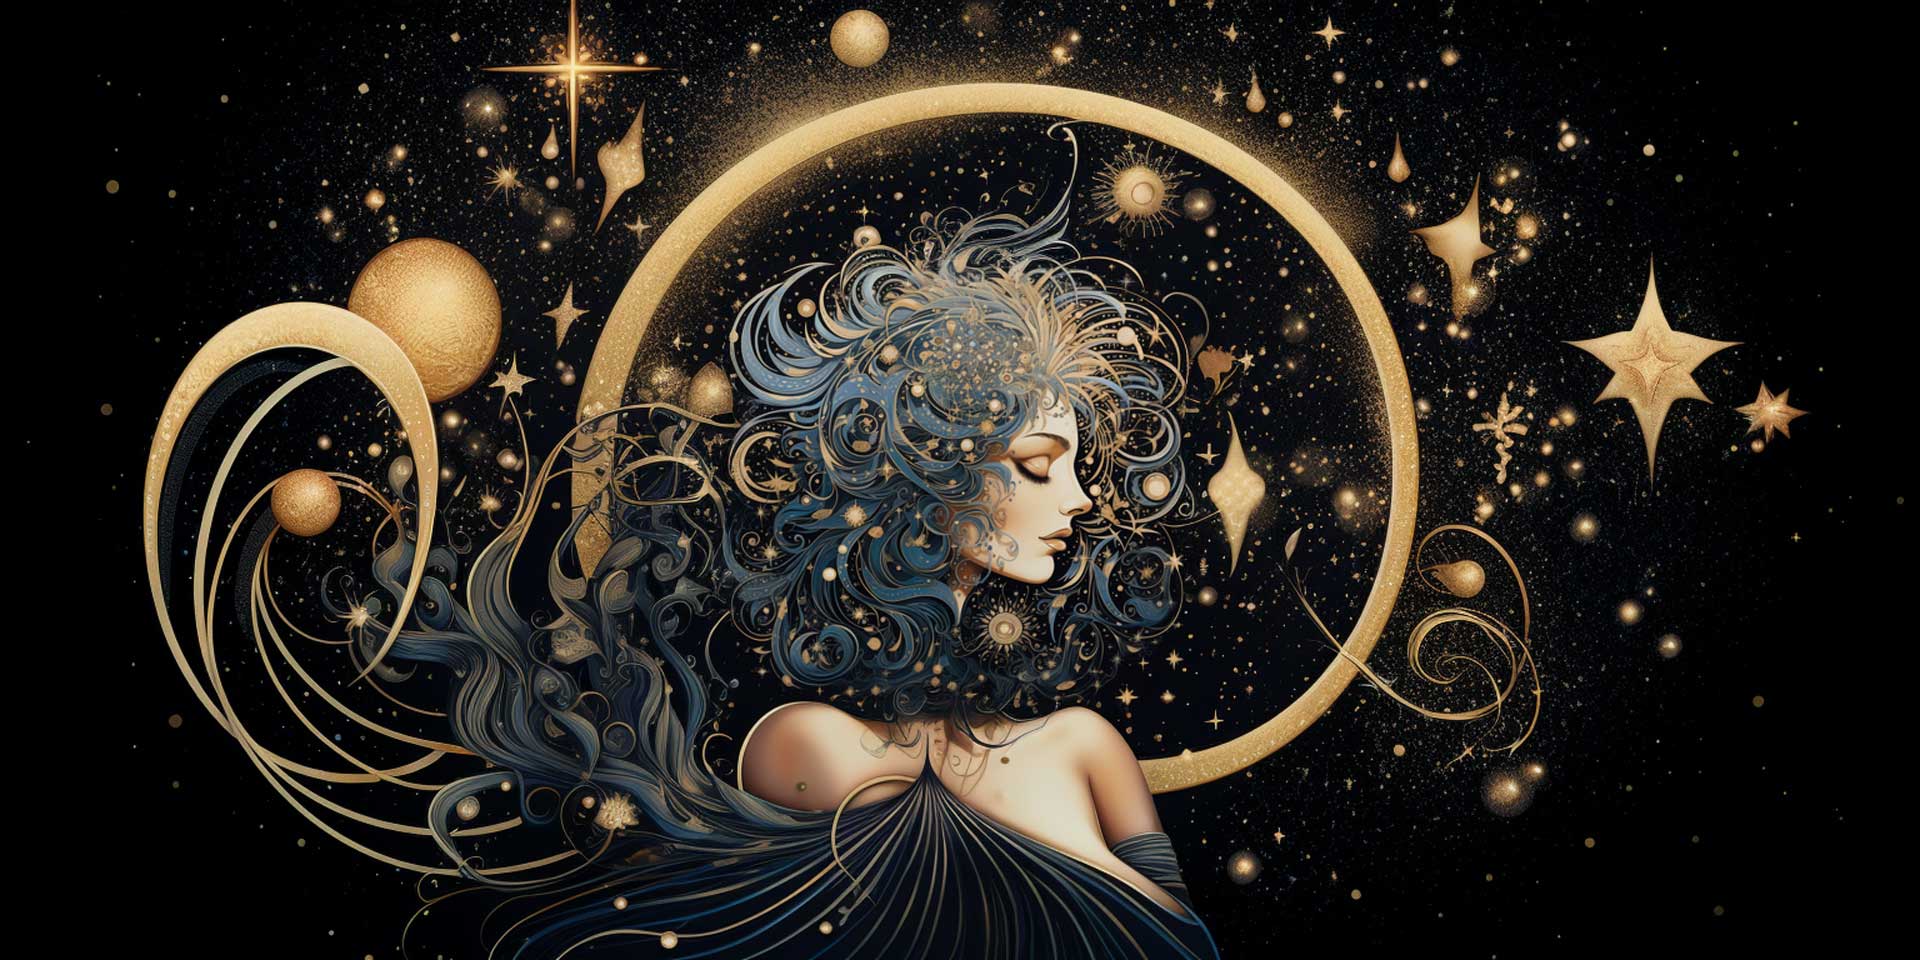 An illustration of the personification of a Virgo New Moon